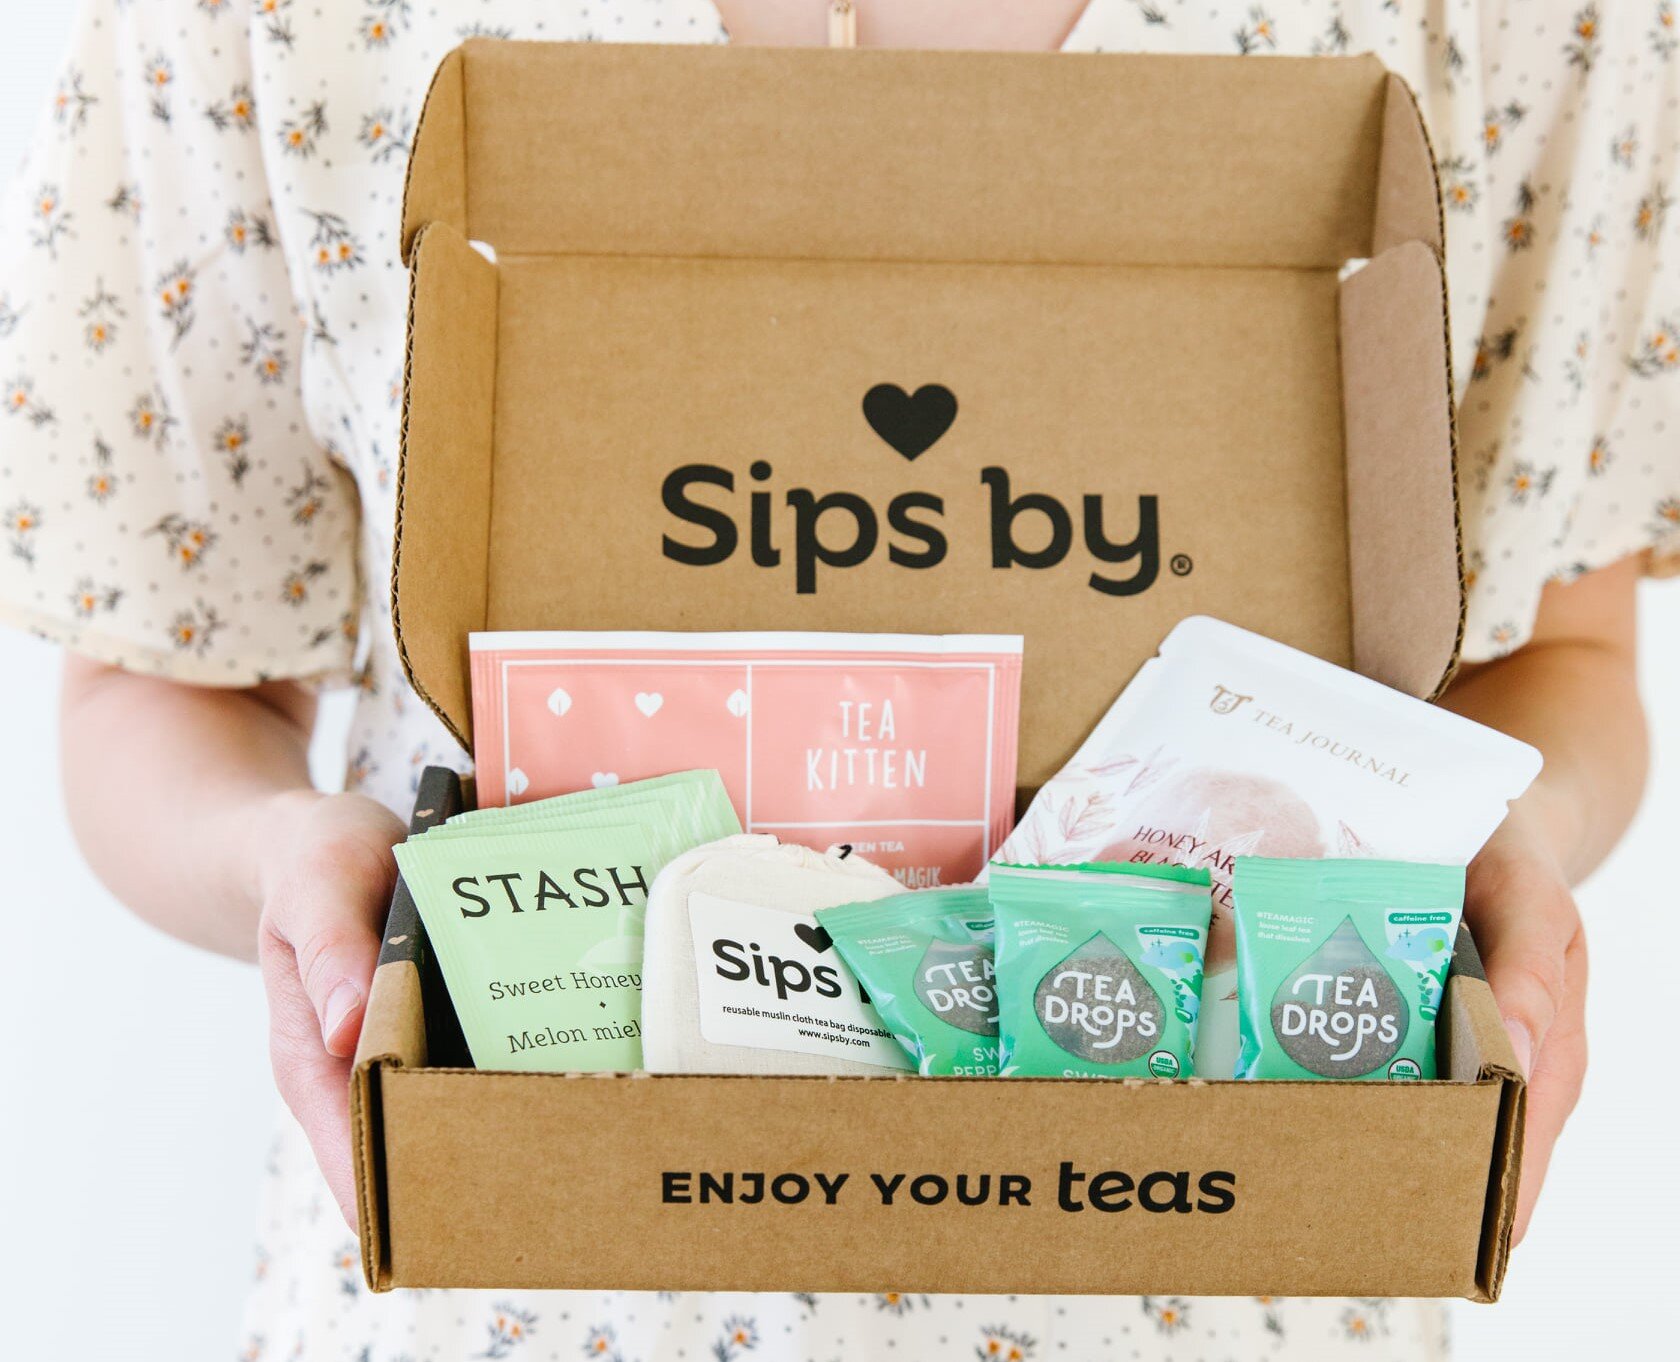 The Sips by Box is a personalized tea subscription box. 